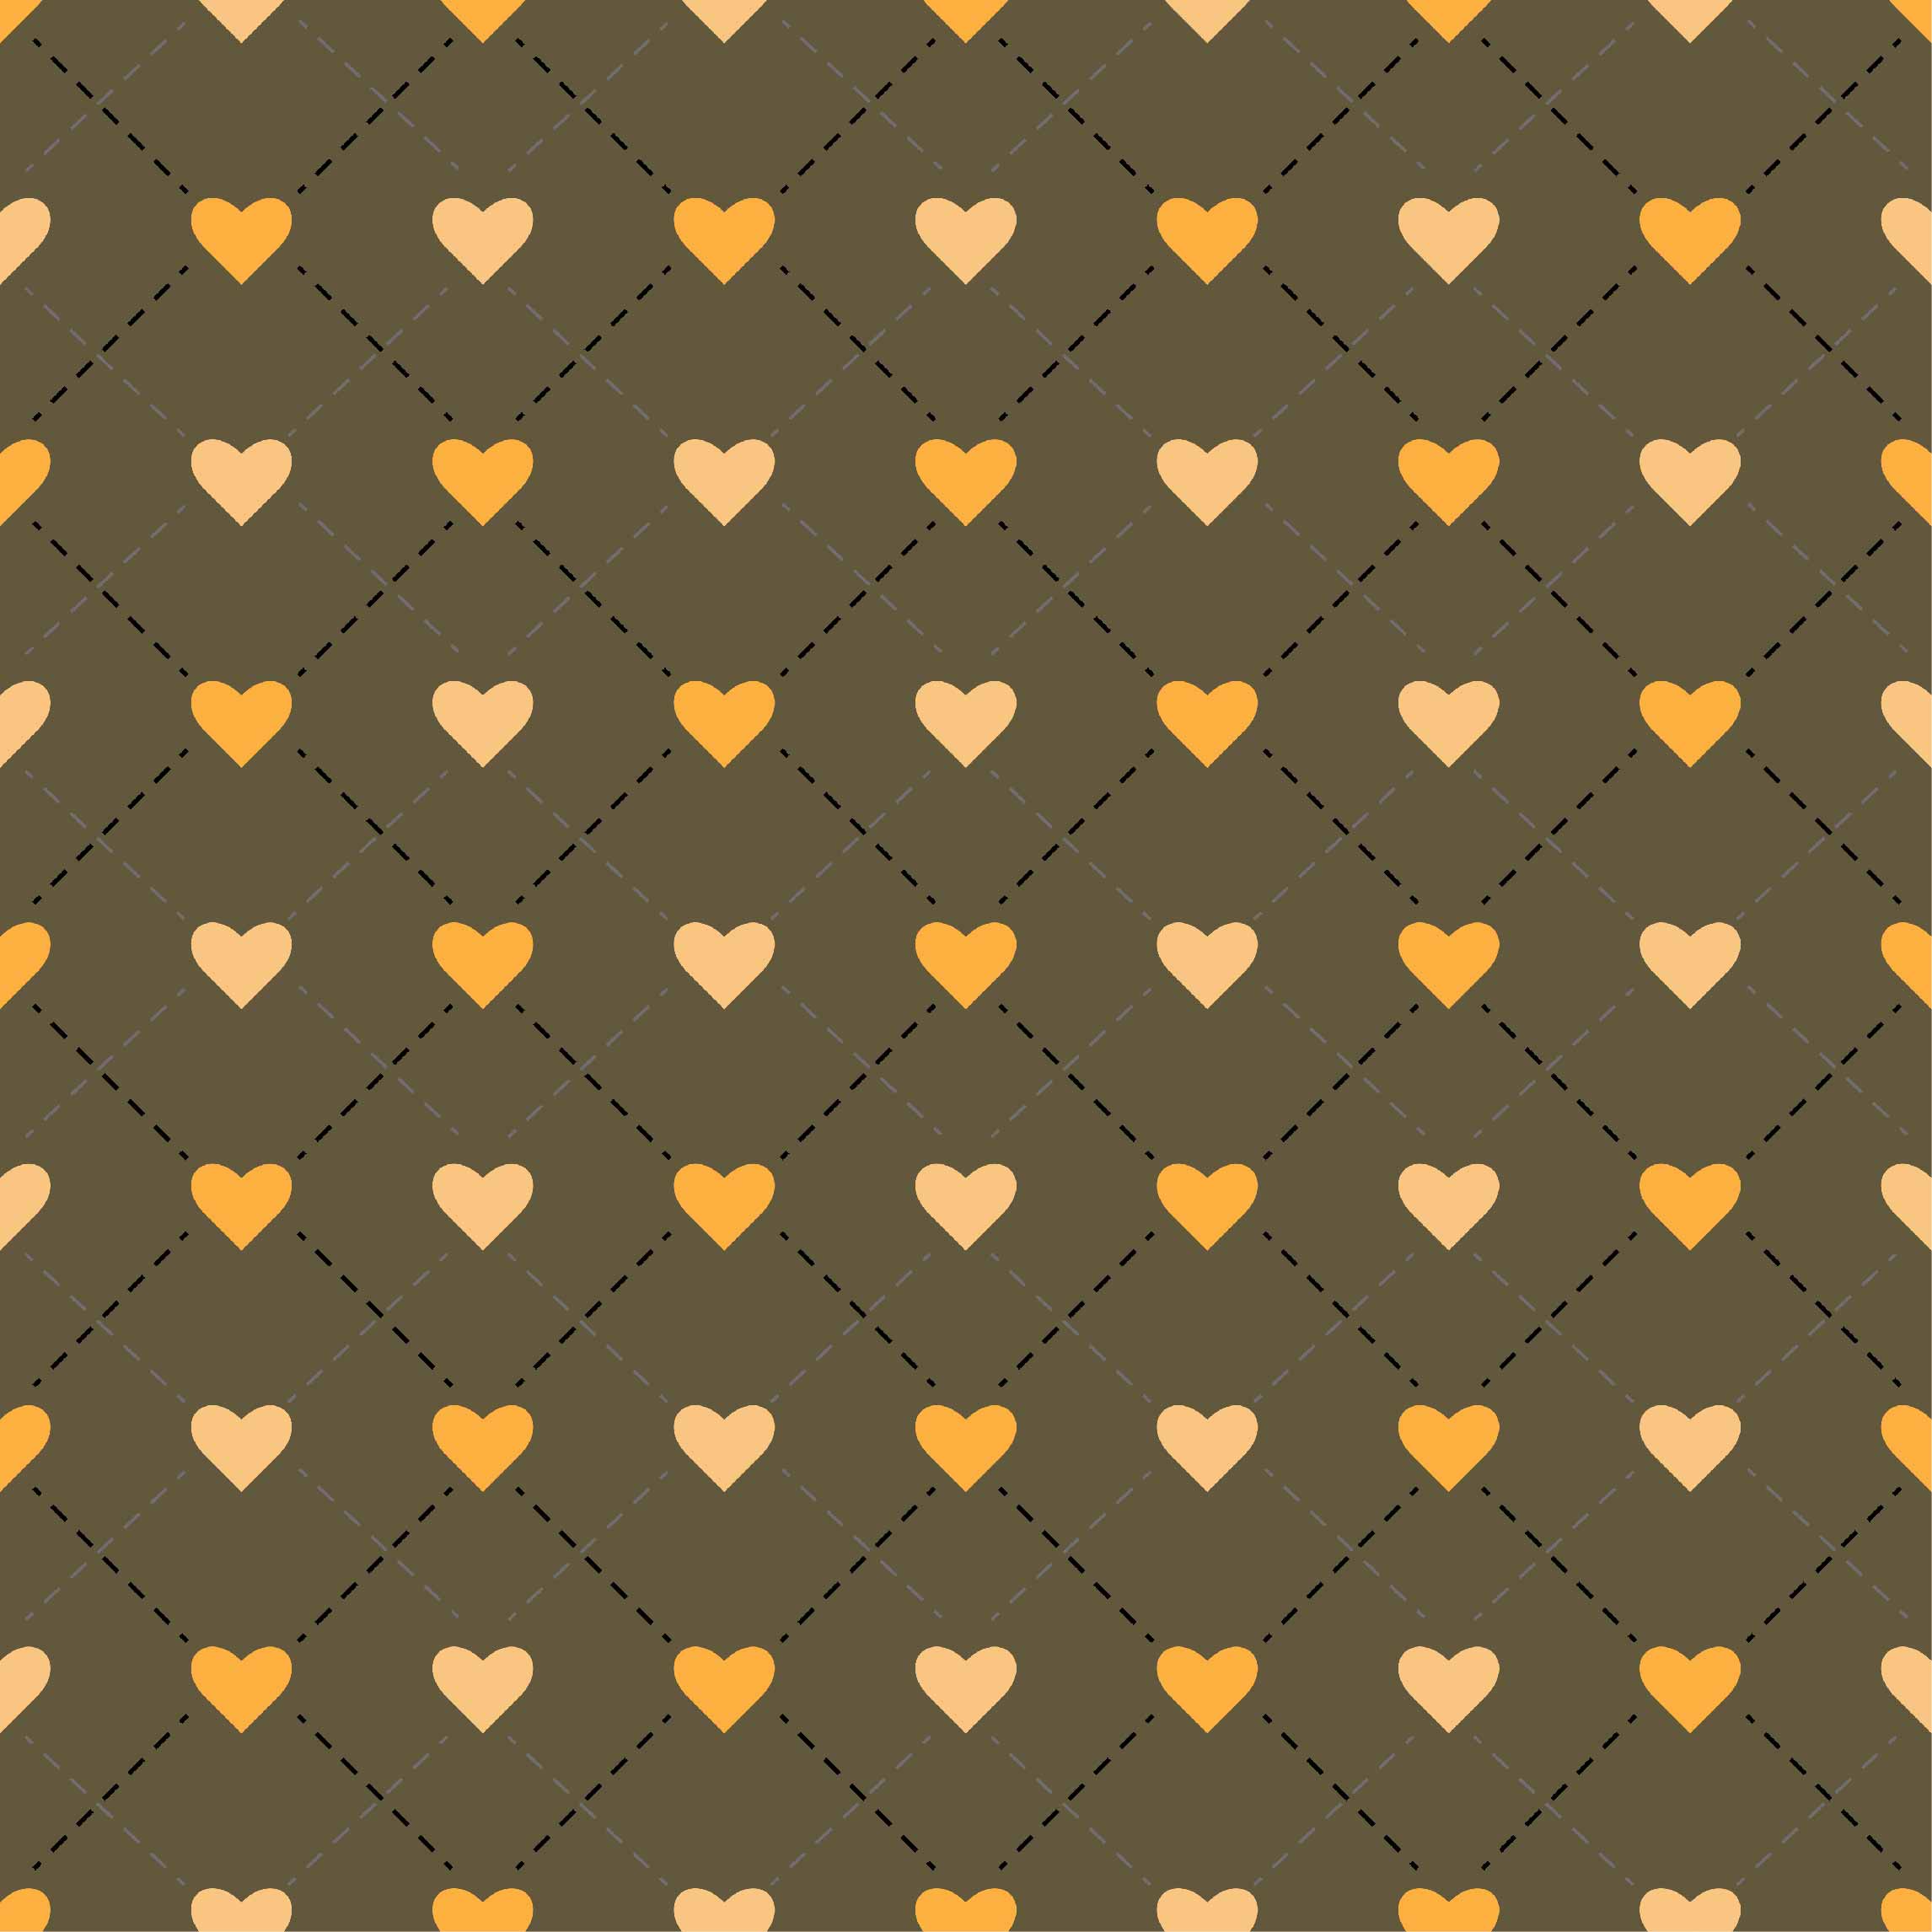 So cute small gold hearts on a dark olive background.